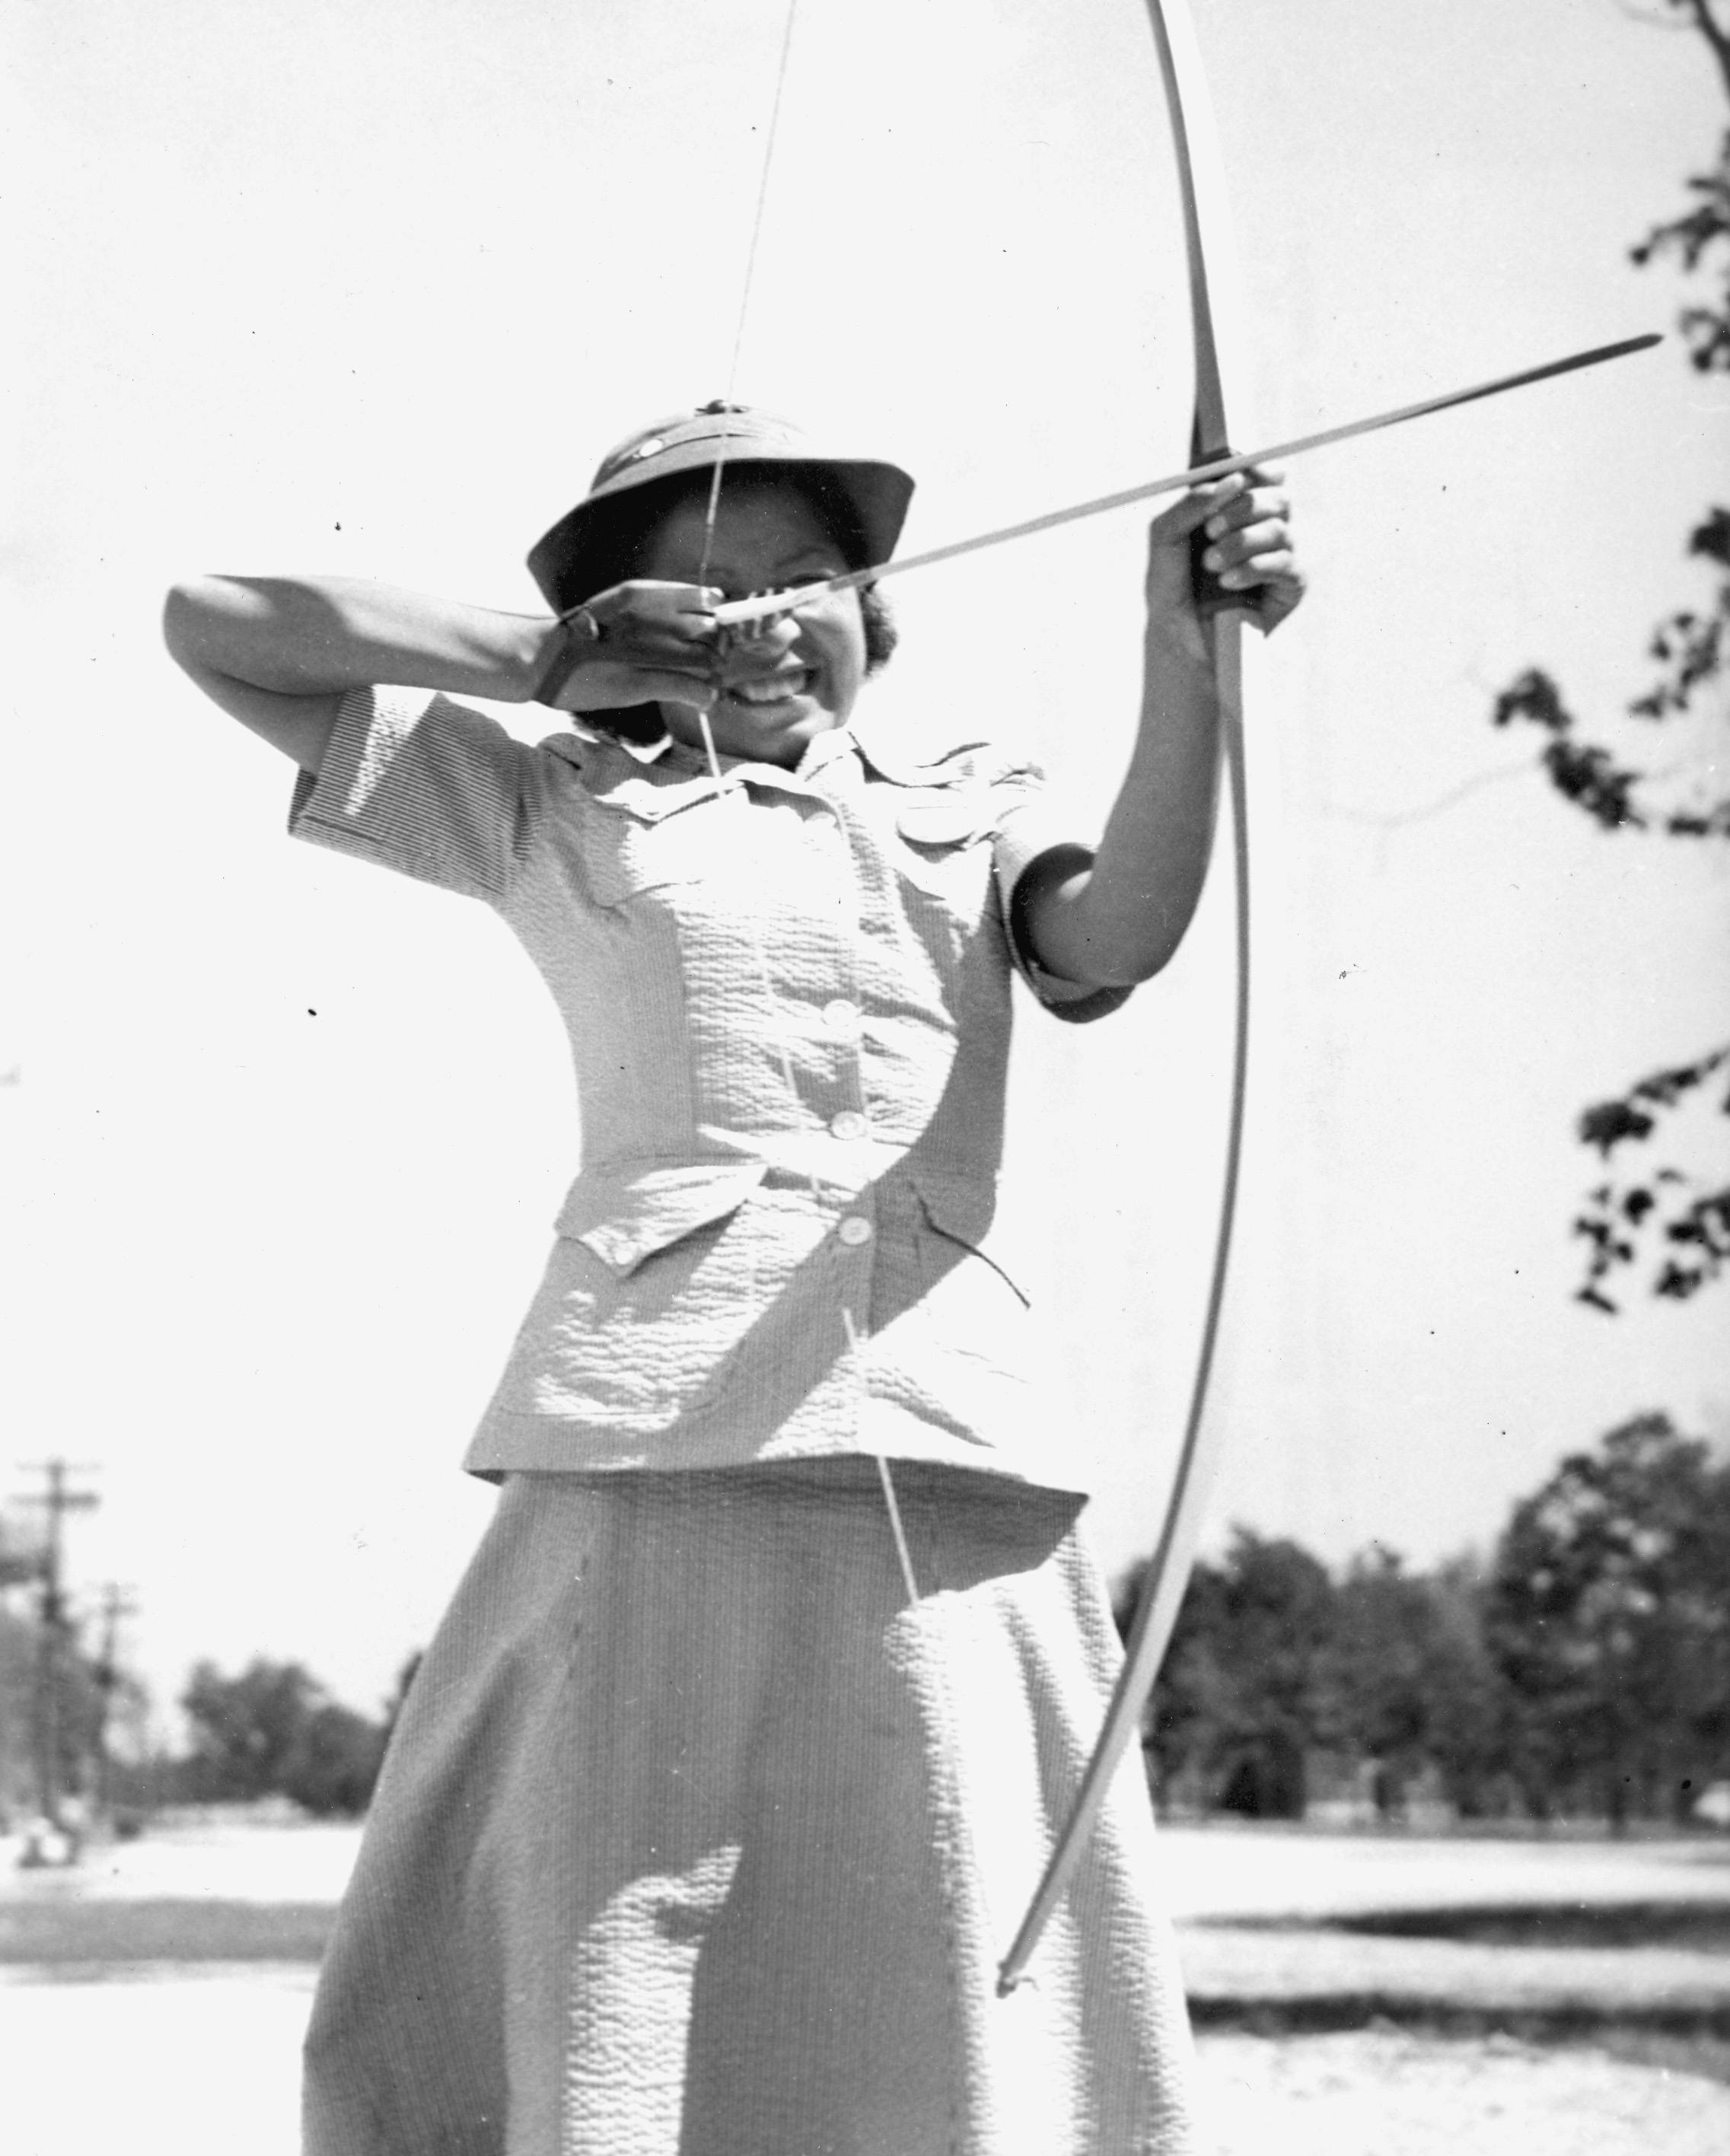 Marine Private Practices with Bow and Arrow – Women of World War II